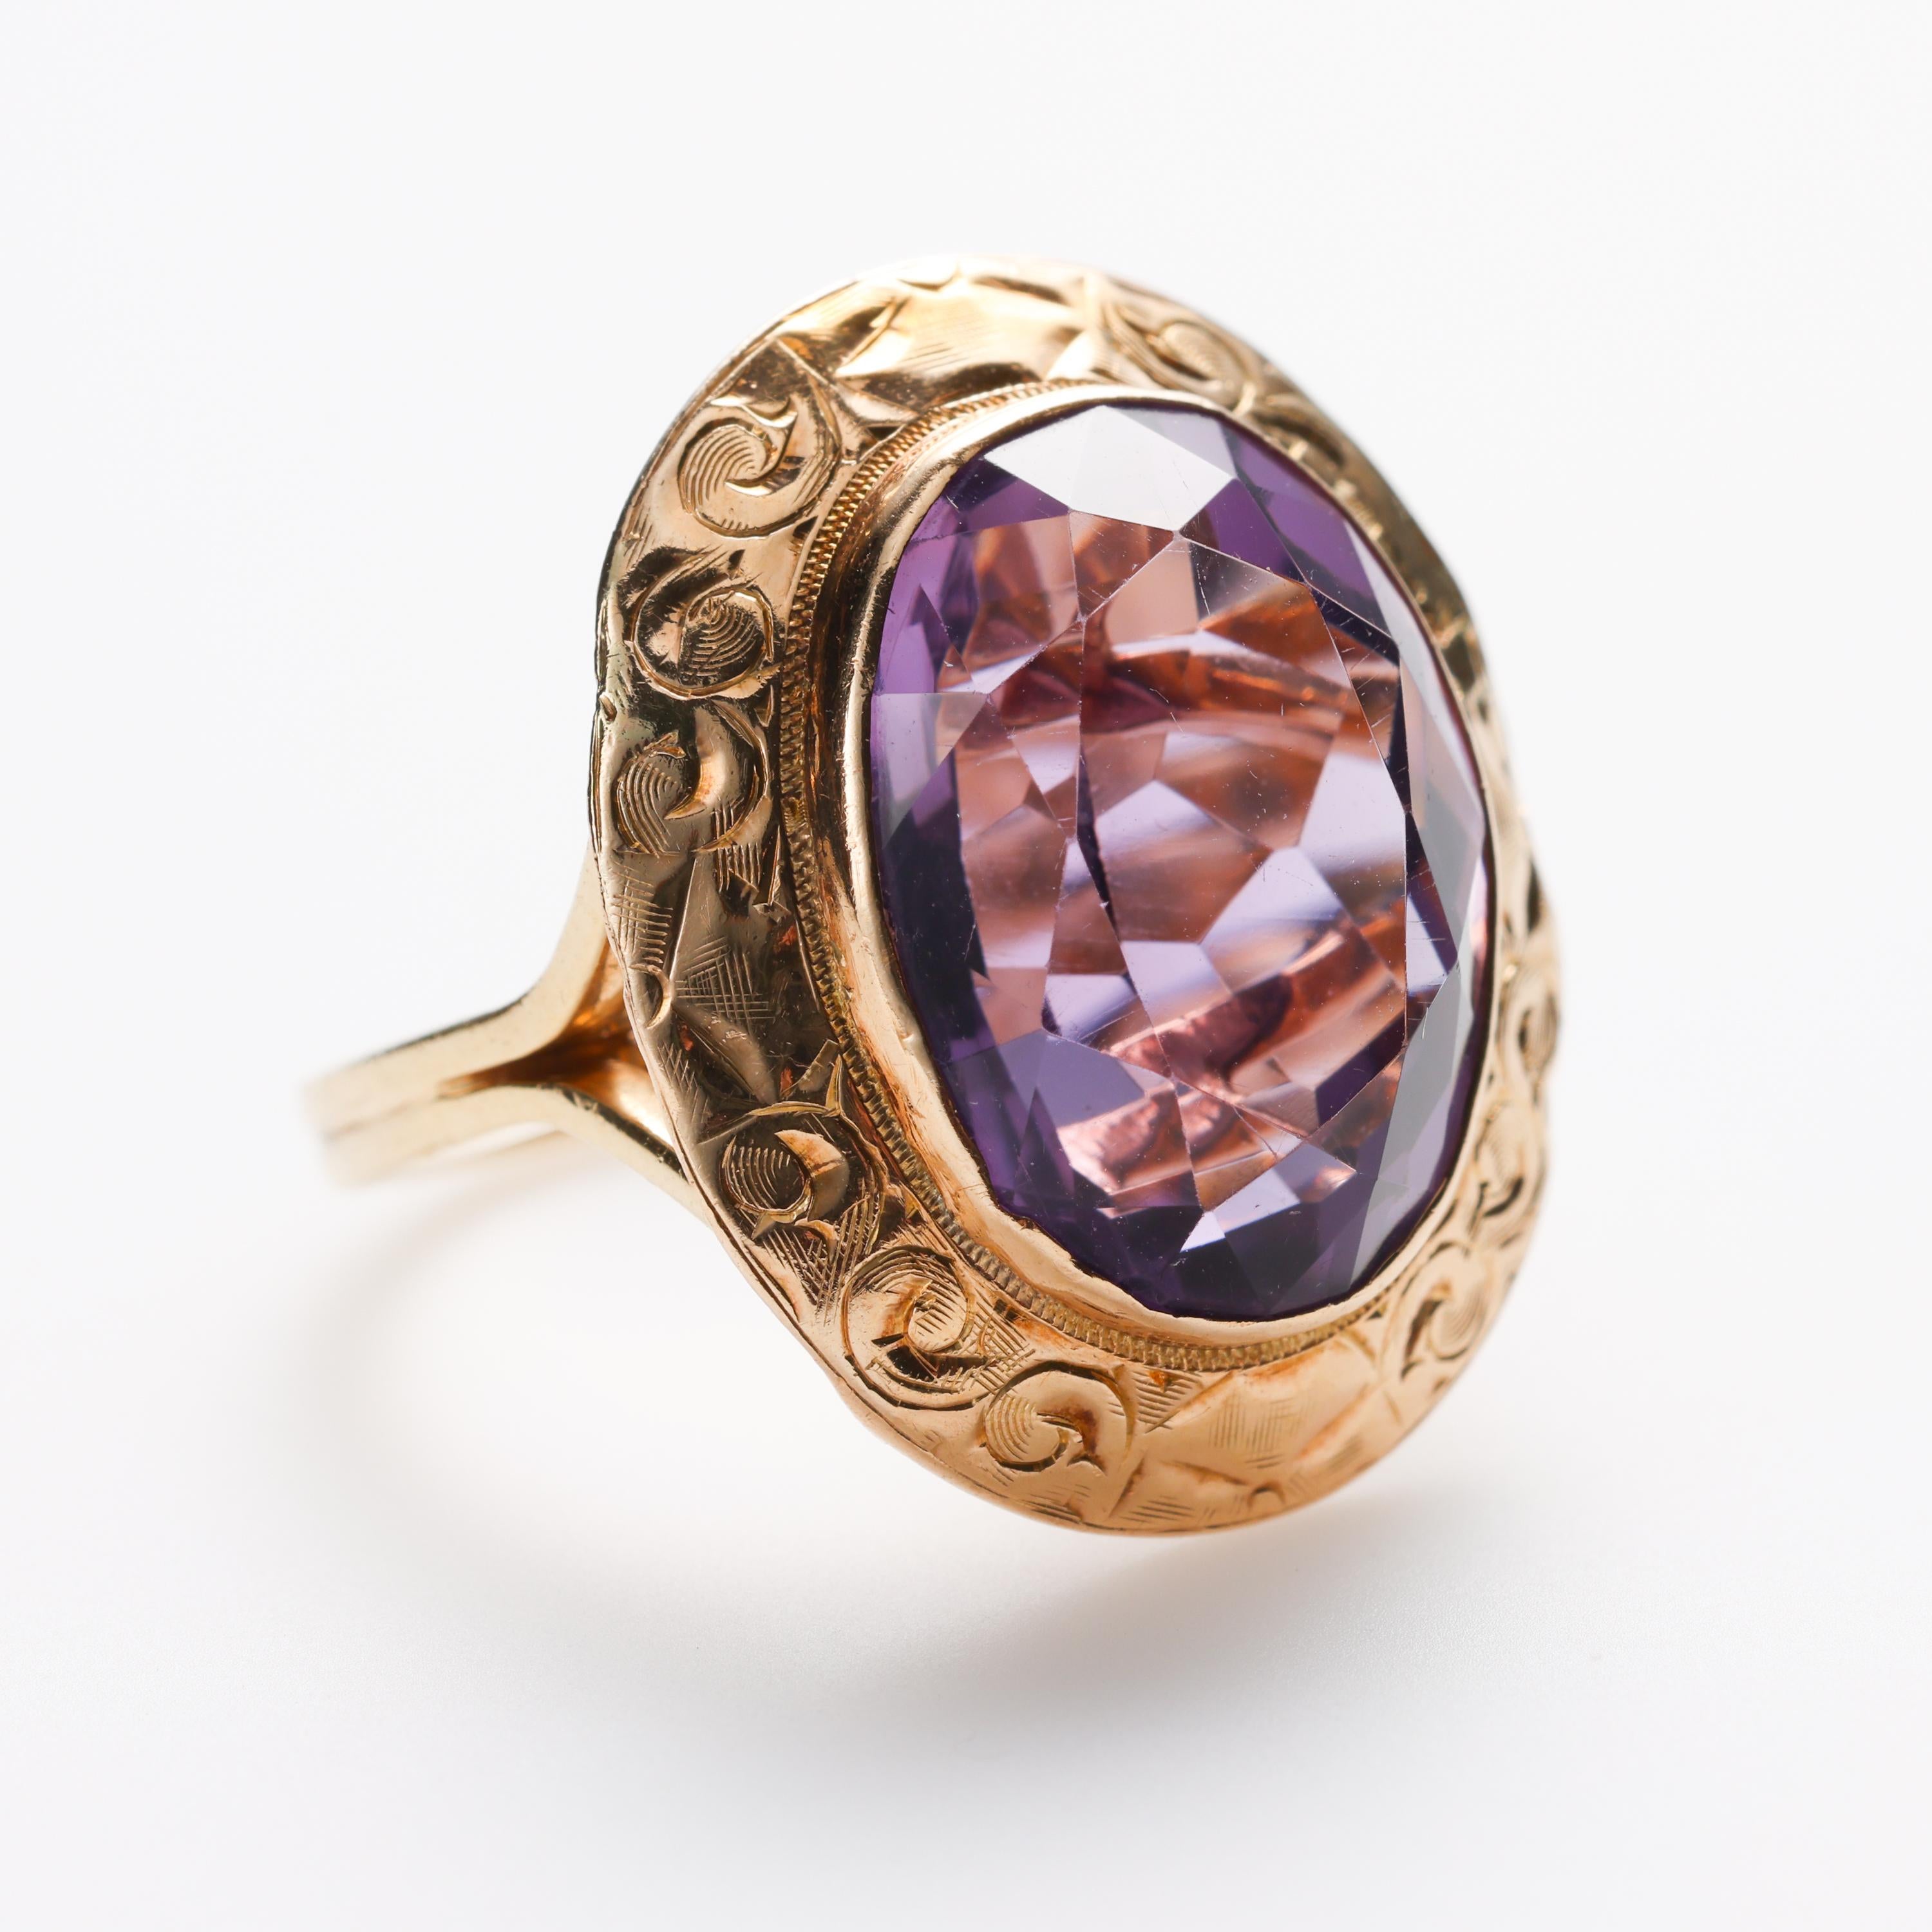 Flashy and splashy, this 14K yellow gold hand-fabricated ring features a large (Approximately 7.5 carats) natural, fire-filled amethyst. The stone is beautifully cut and bezel-set. The ring measures 22.43mm north to south and 18.43 west to east. Yet